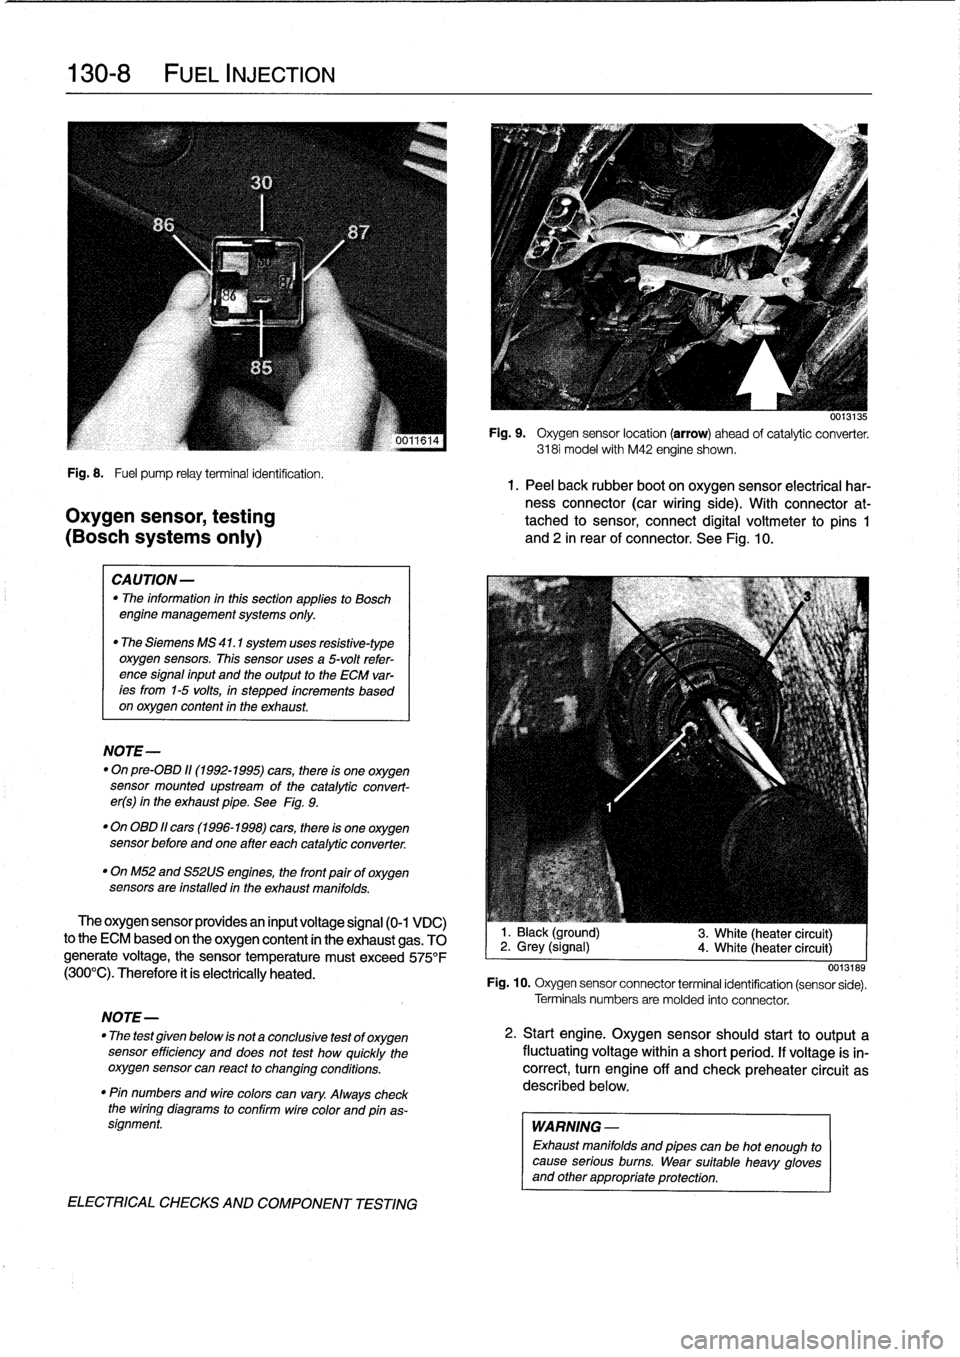 BMW 323i 1993 E36 Workshop Manual 
130-
8

	

FUEL
INJECTION

Fig
.
8
.

	

Fuel
pump
relayterminal
identification
.
1.
Peel
back
rubber
boot
on
oxygen
sensor
electrical
har-
ness
connector
(car
wiring
side)
.
With
connector
at-
Oxyge